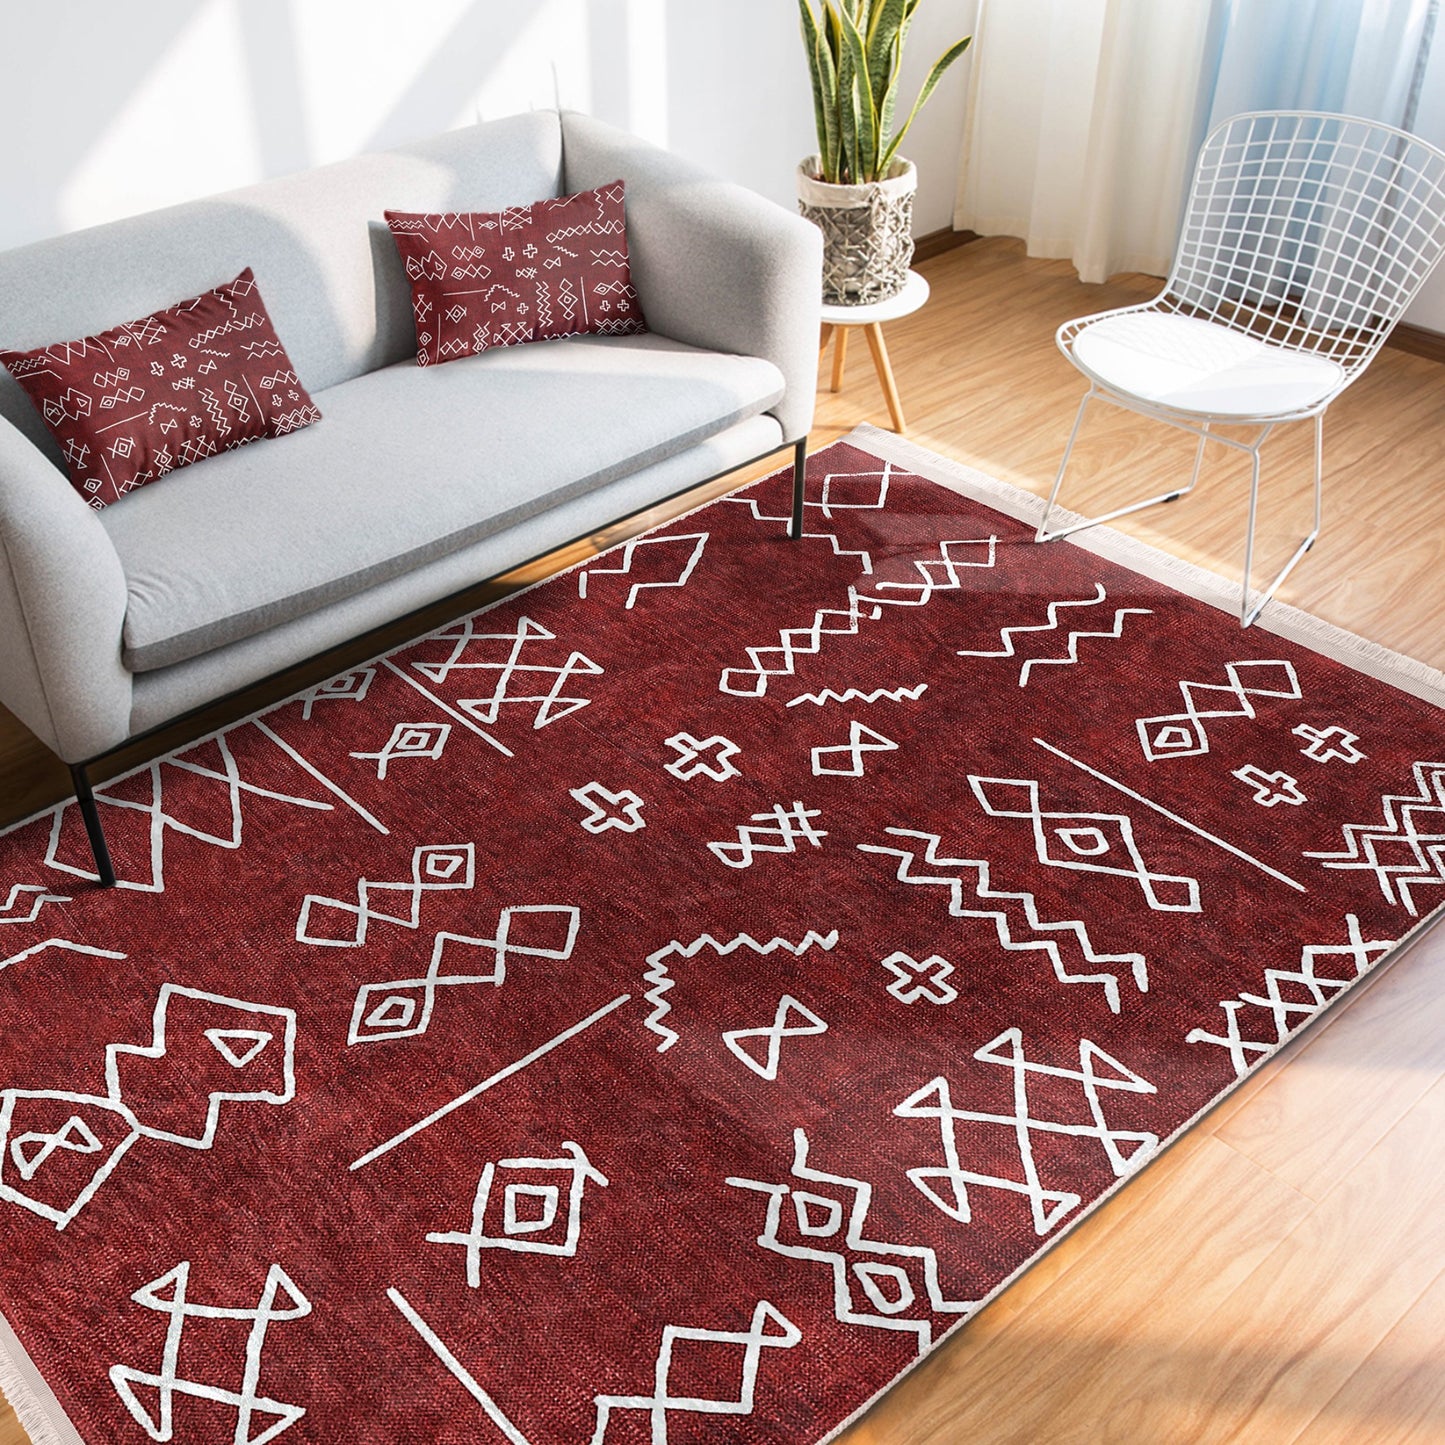 Decorative Living Room Rug with Rich Cultural Heritage Patterns